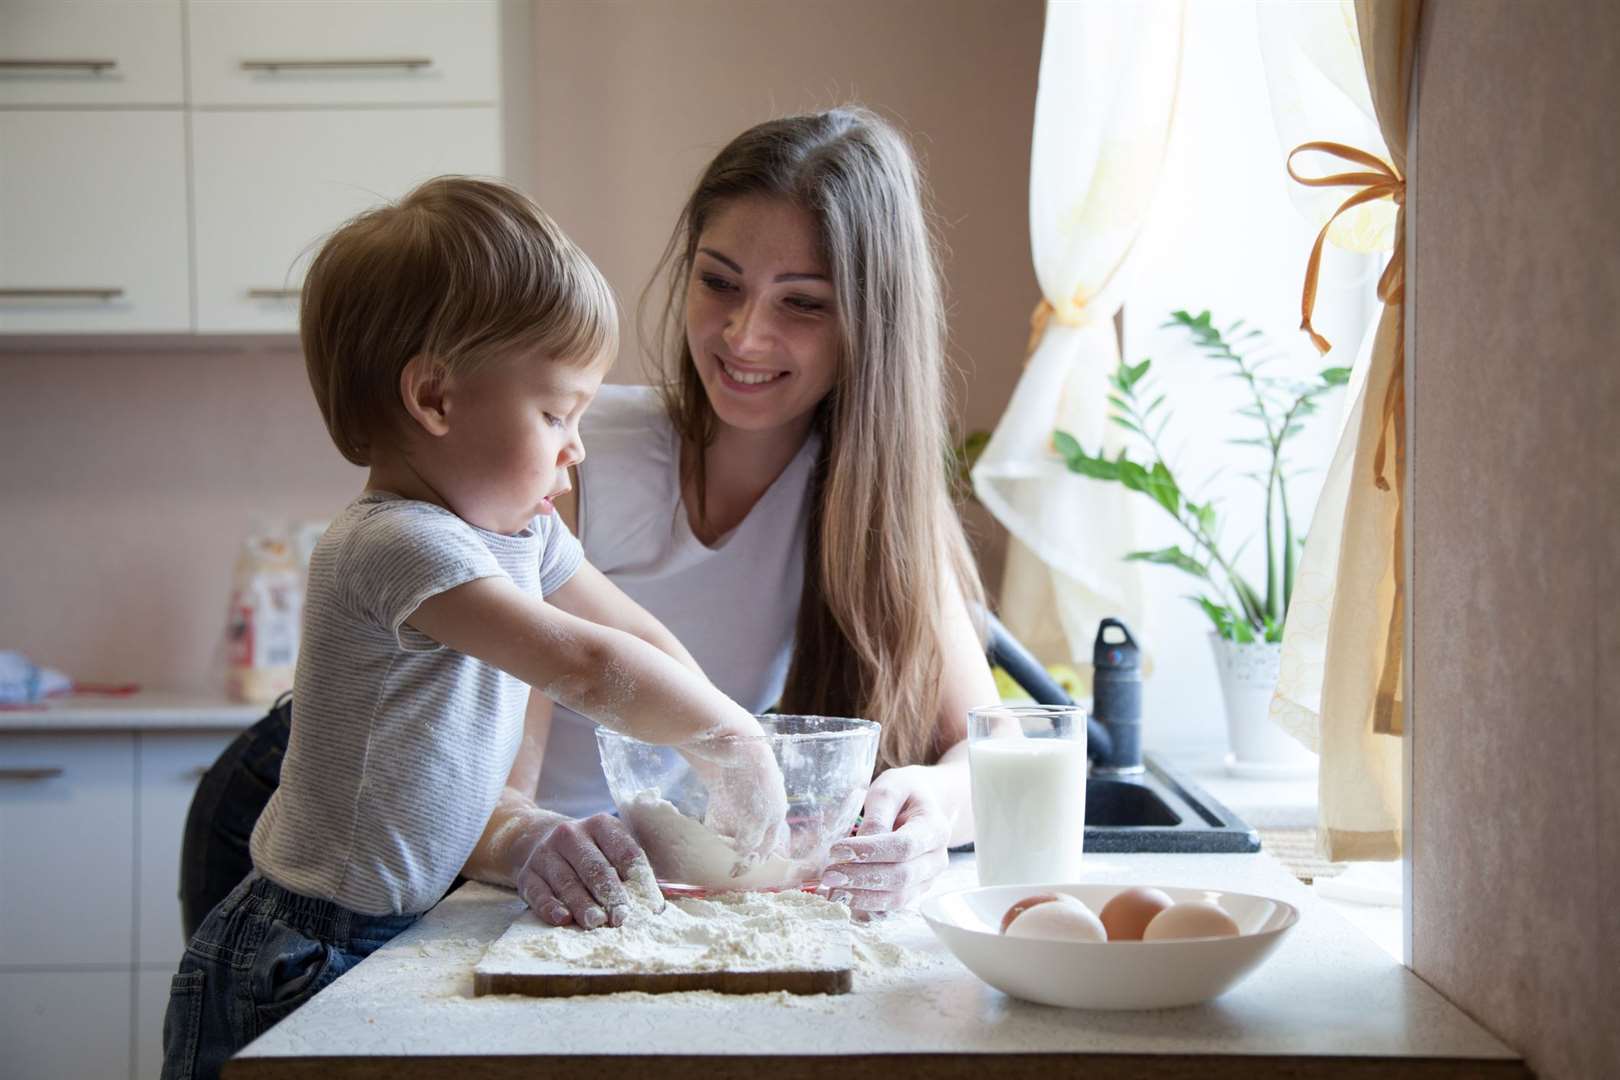 Children love to bake at home